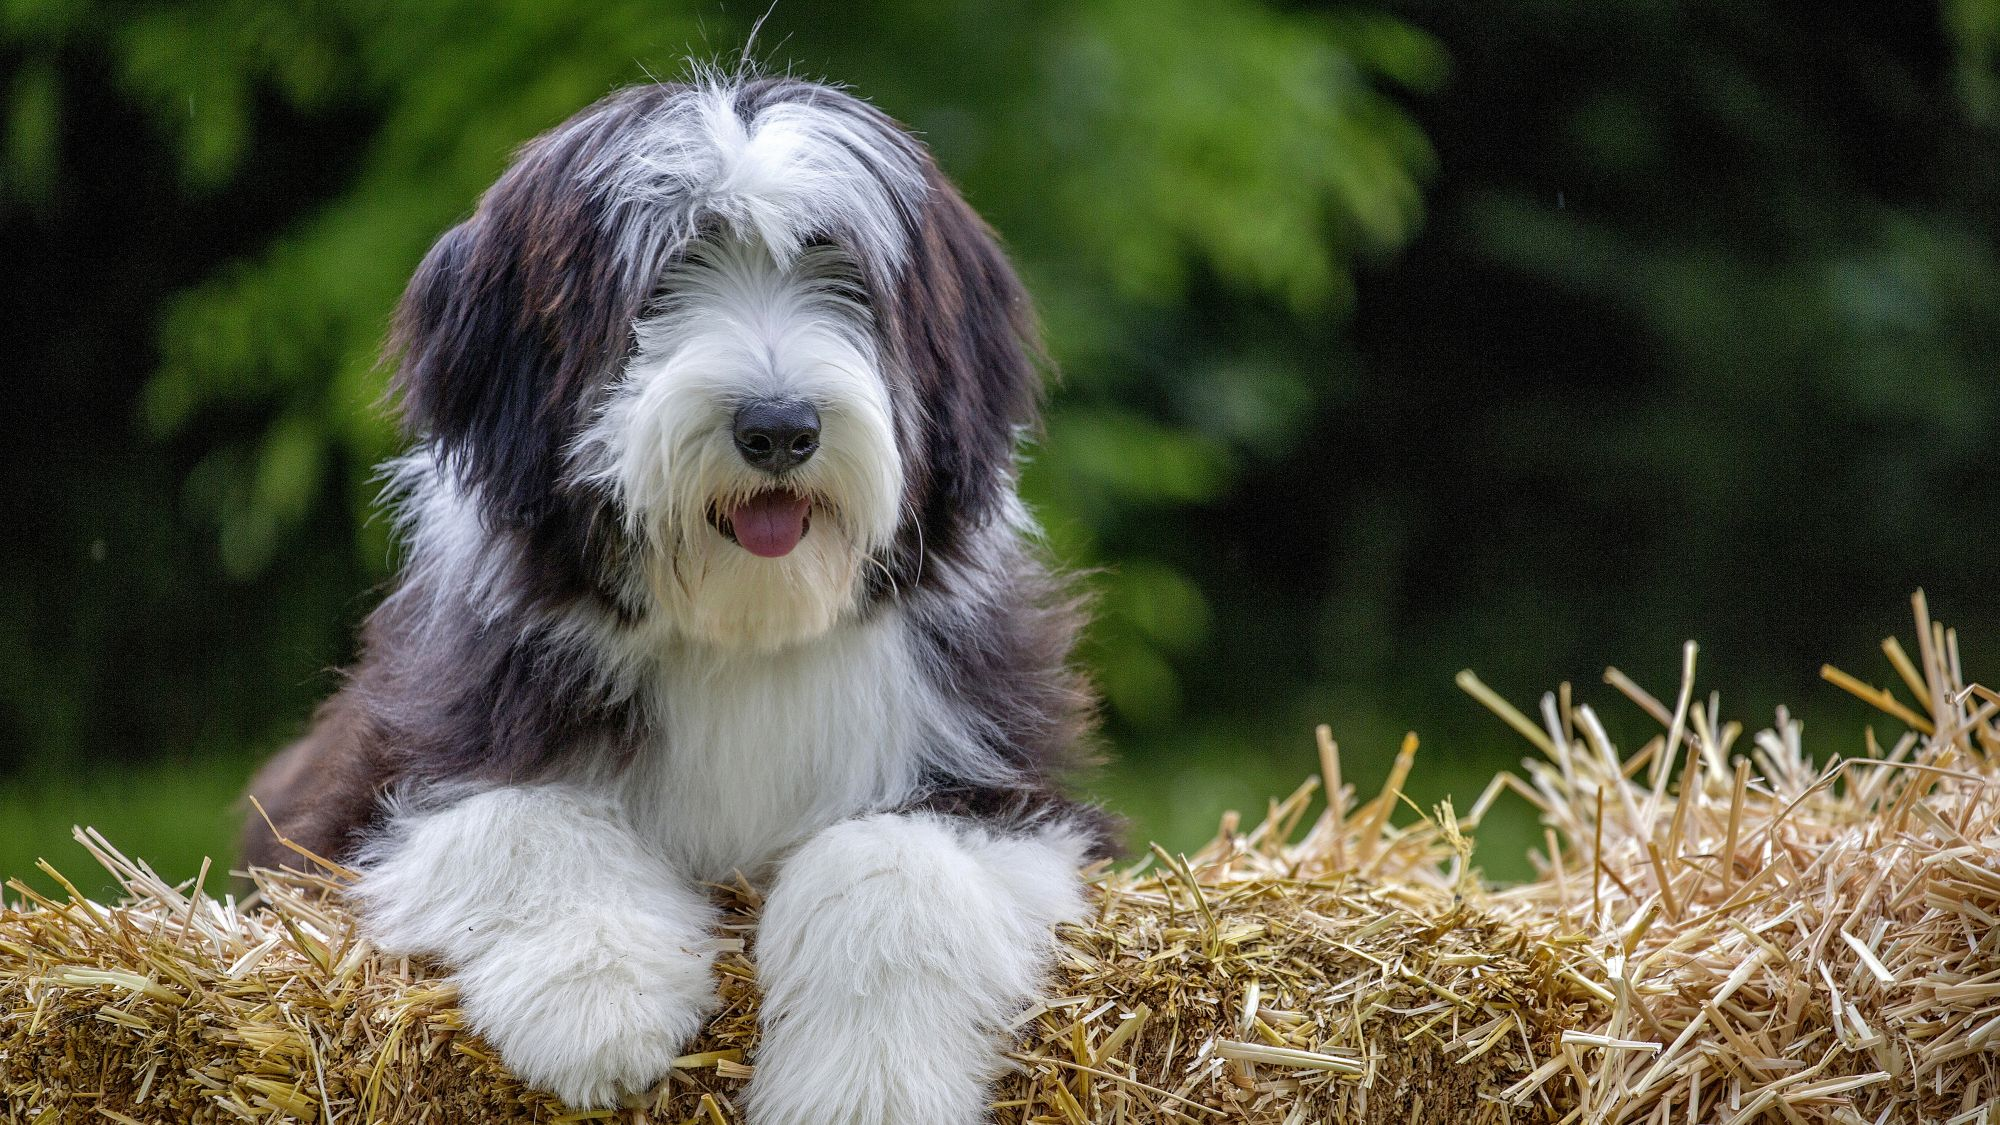 Bearded Collie perched over a bale of hay